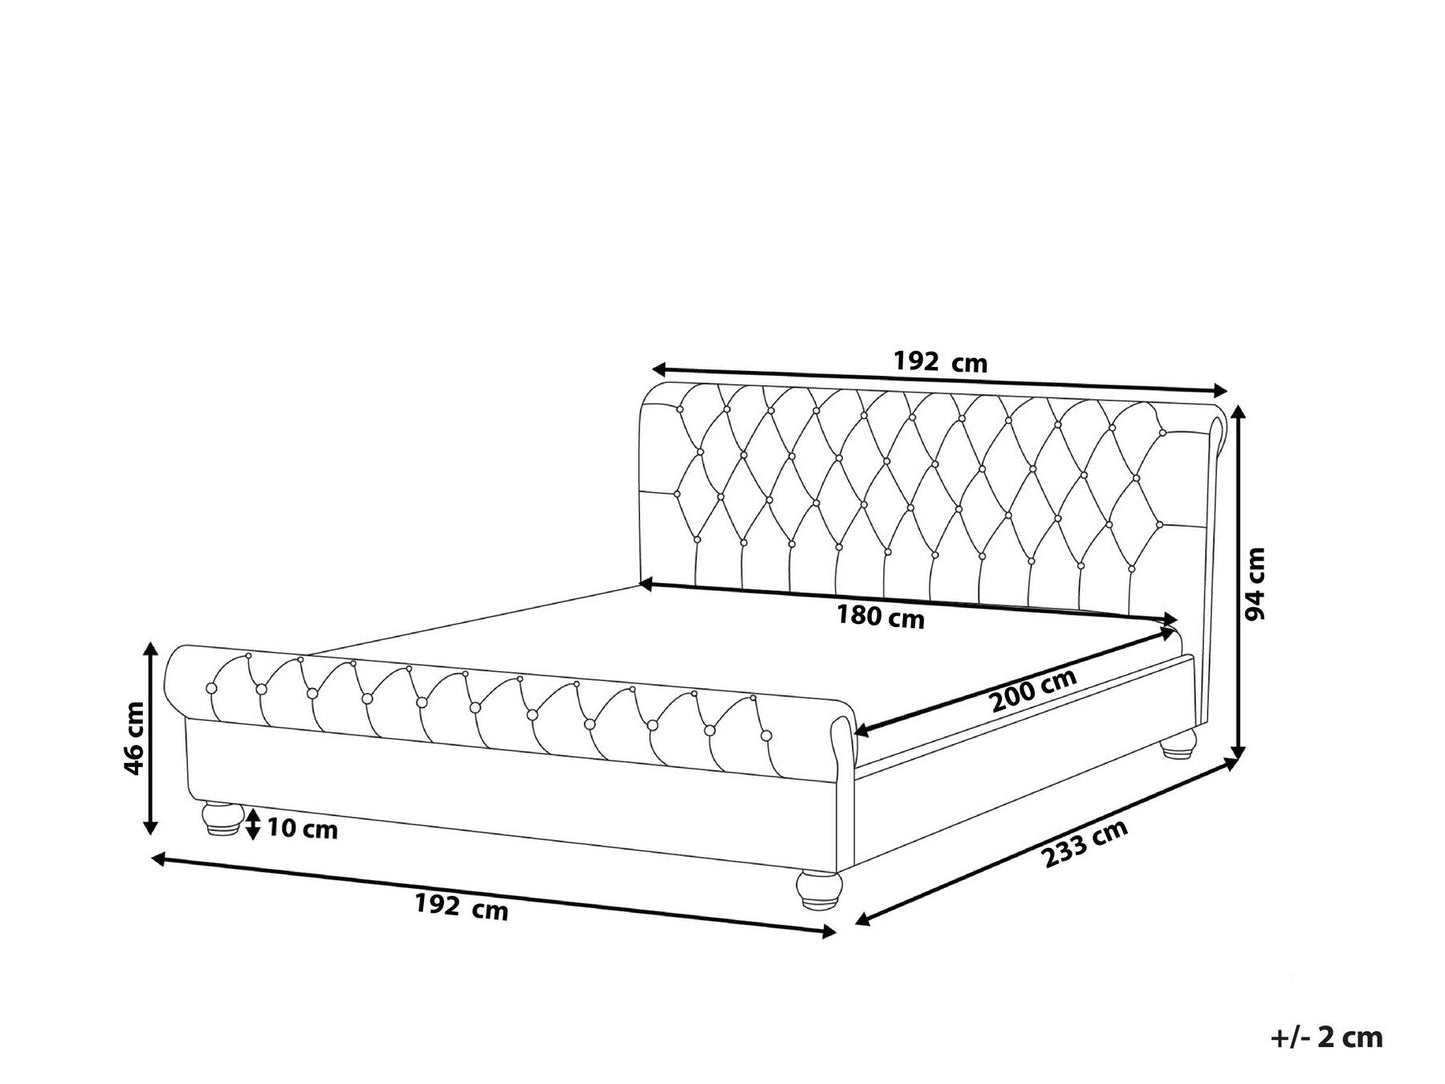 Avalon Fully Upholstered Bed without Storage